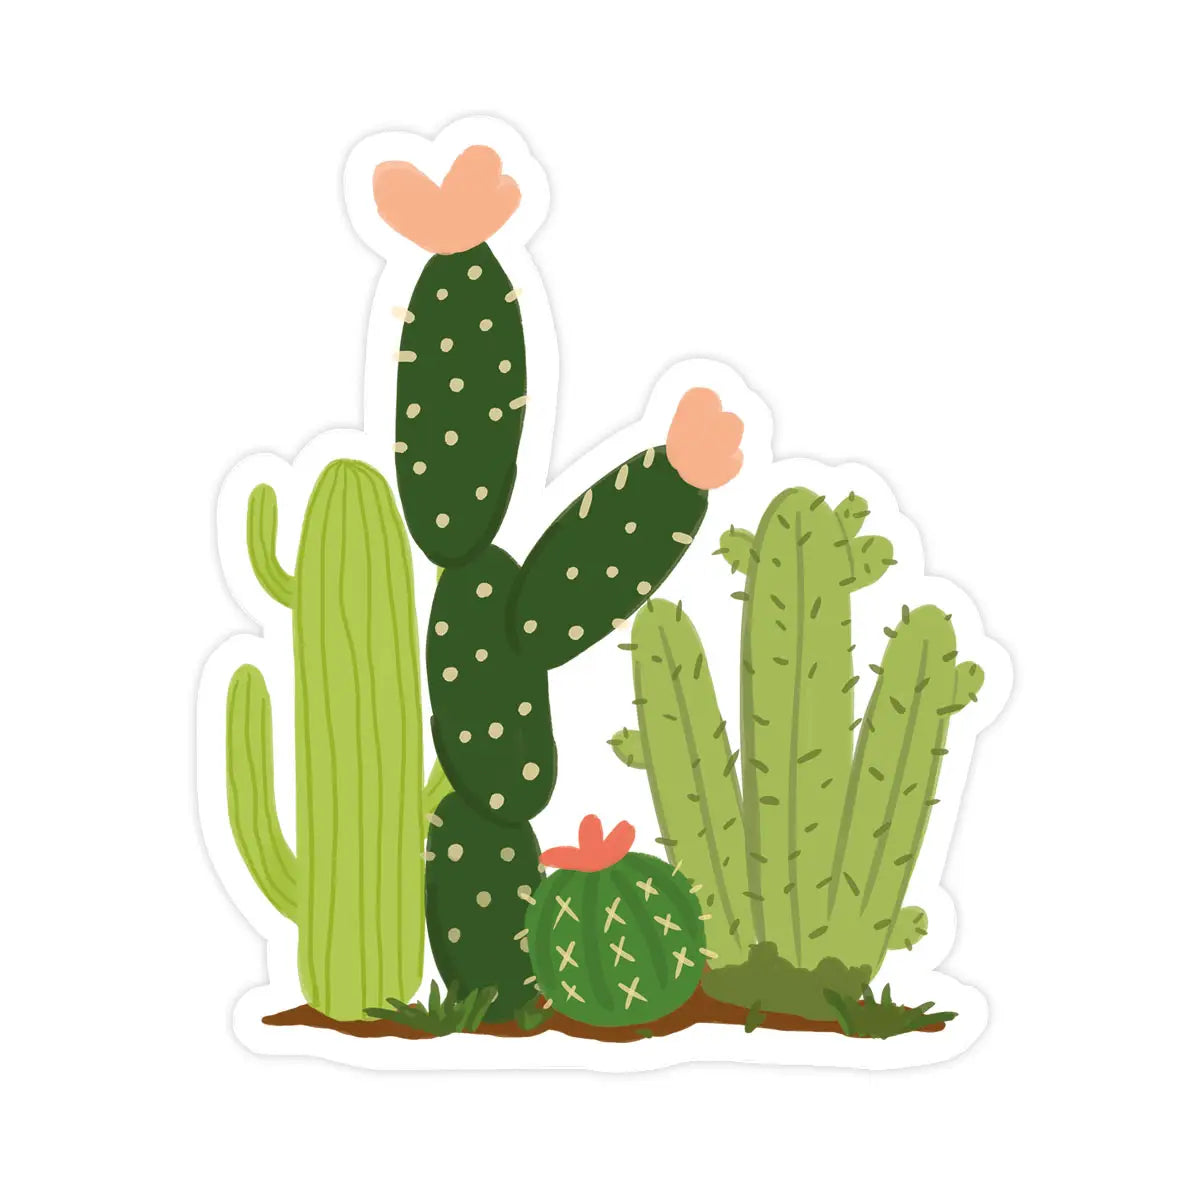 Green Cacti sticker with pink flowers on some of the cacti.